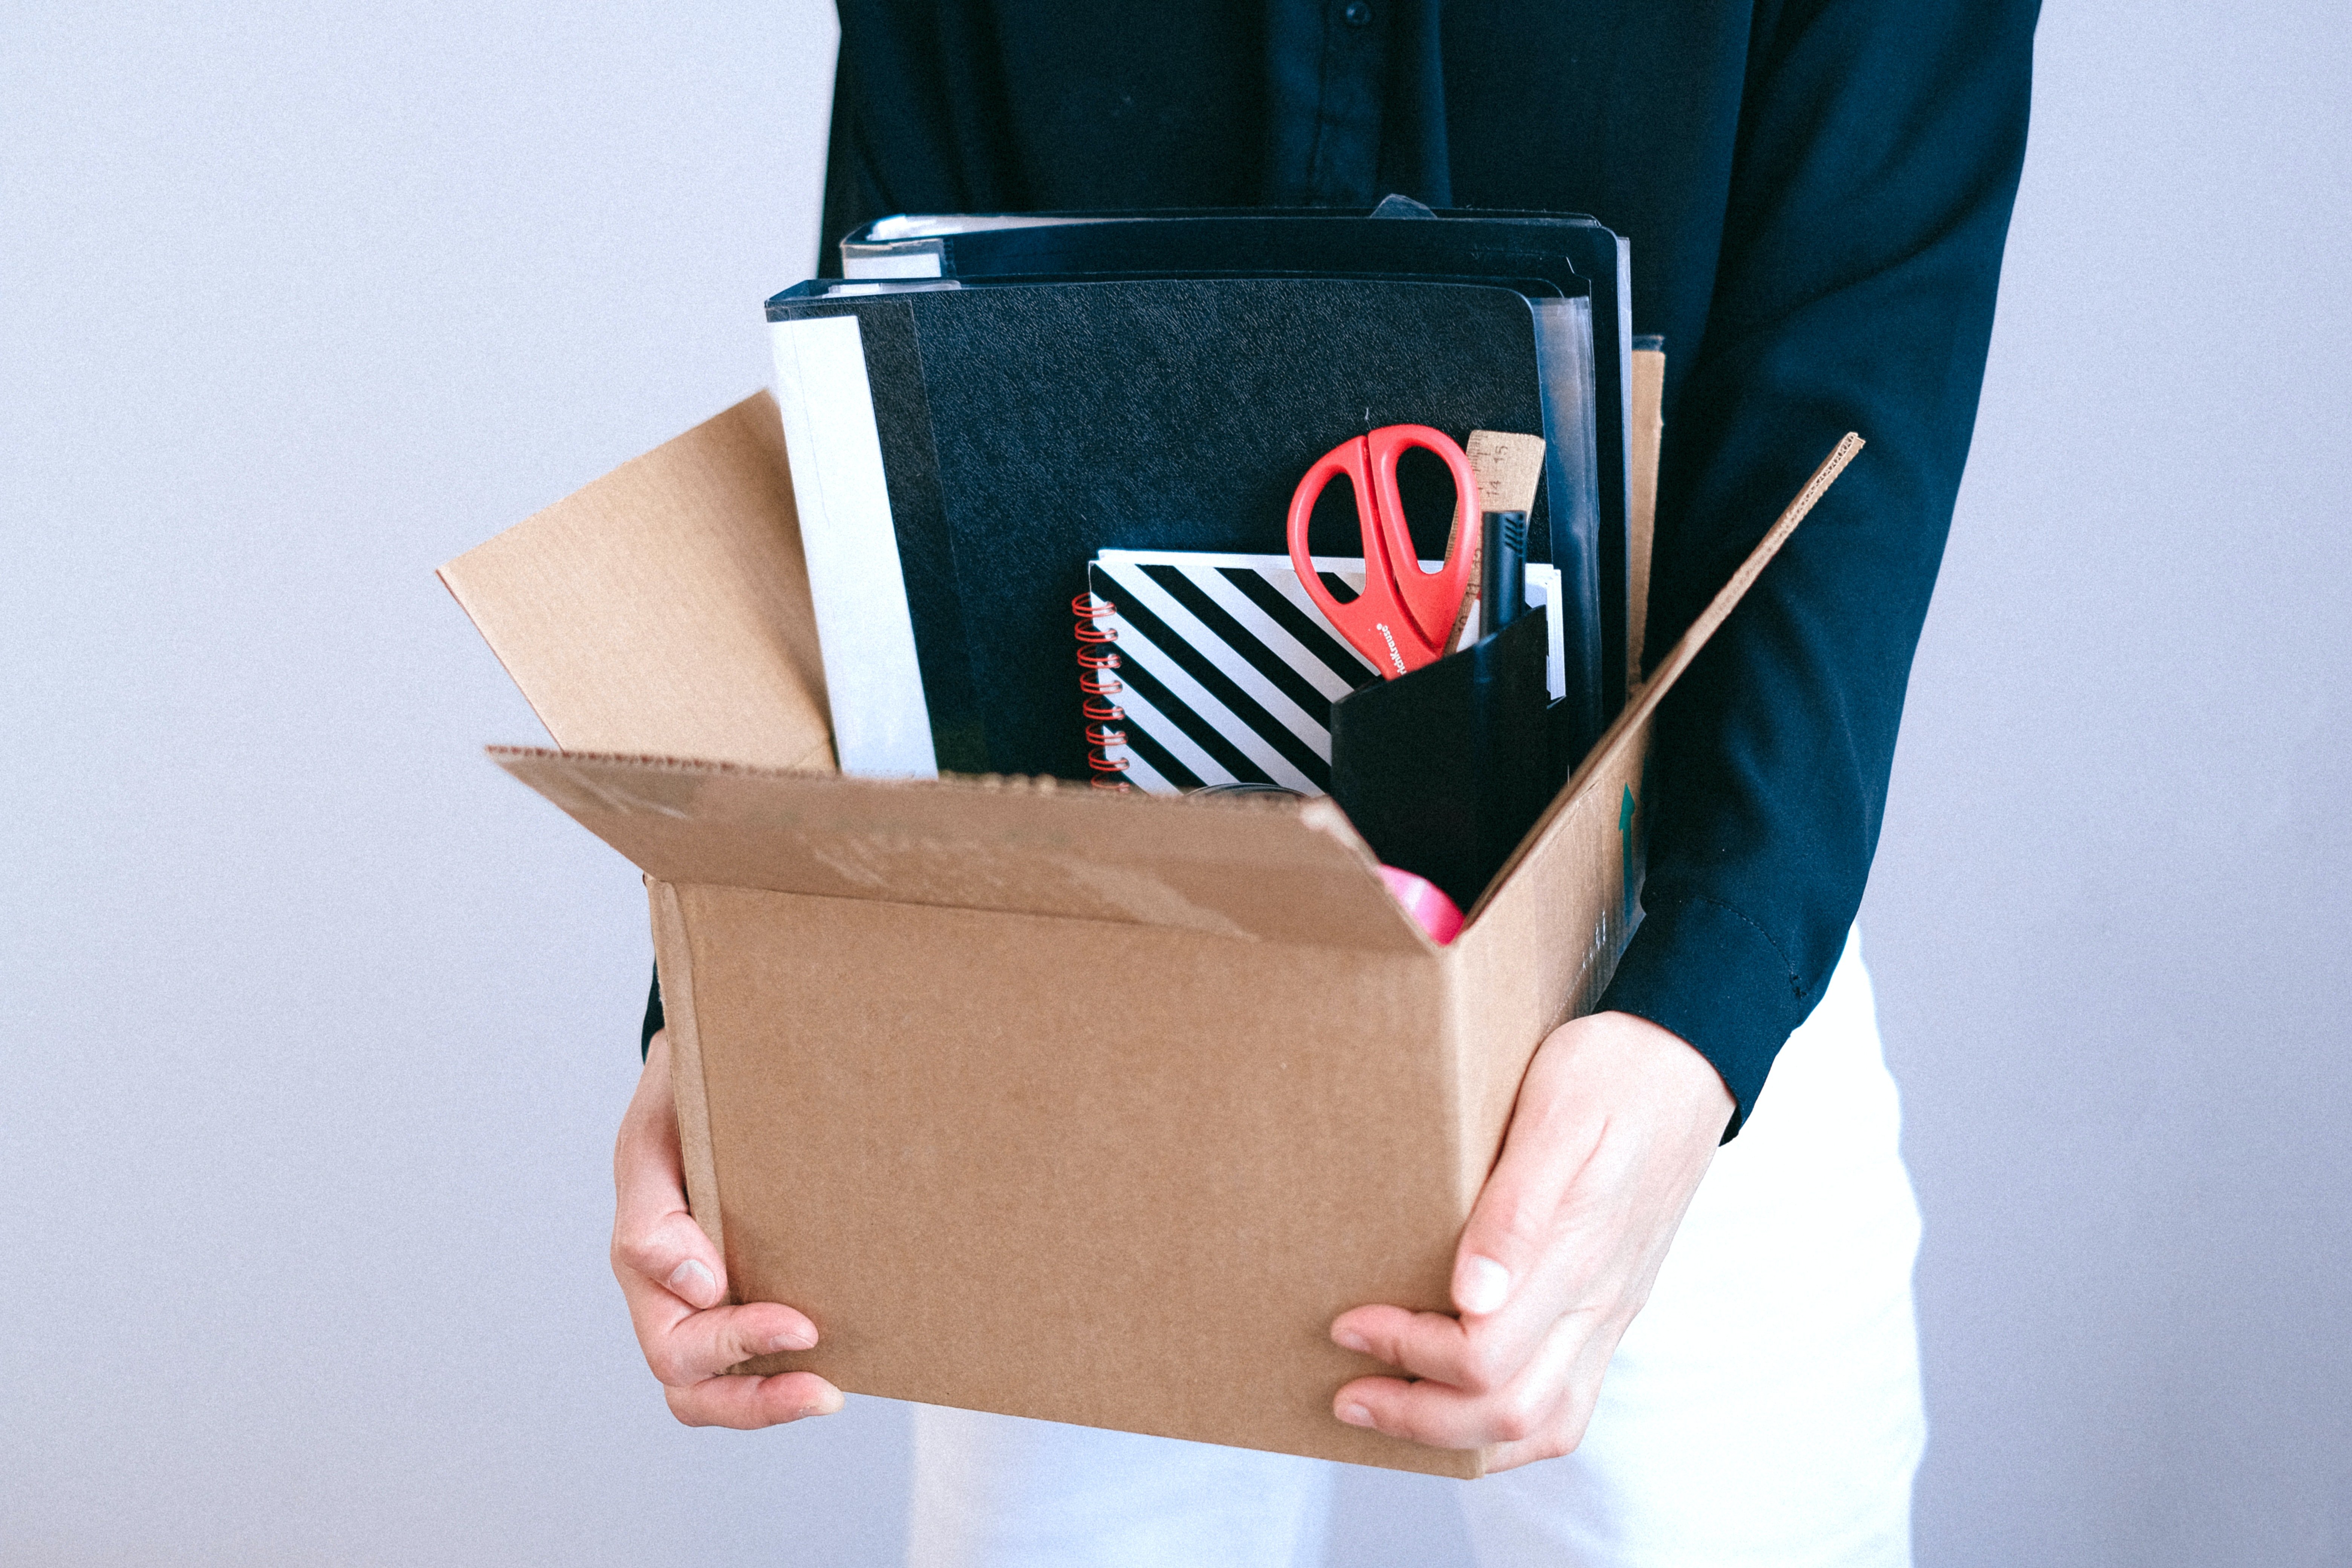 unemployment; woman carrying box with desk items